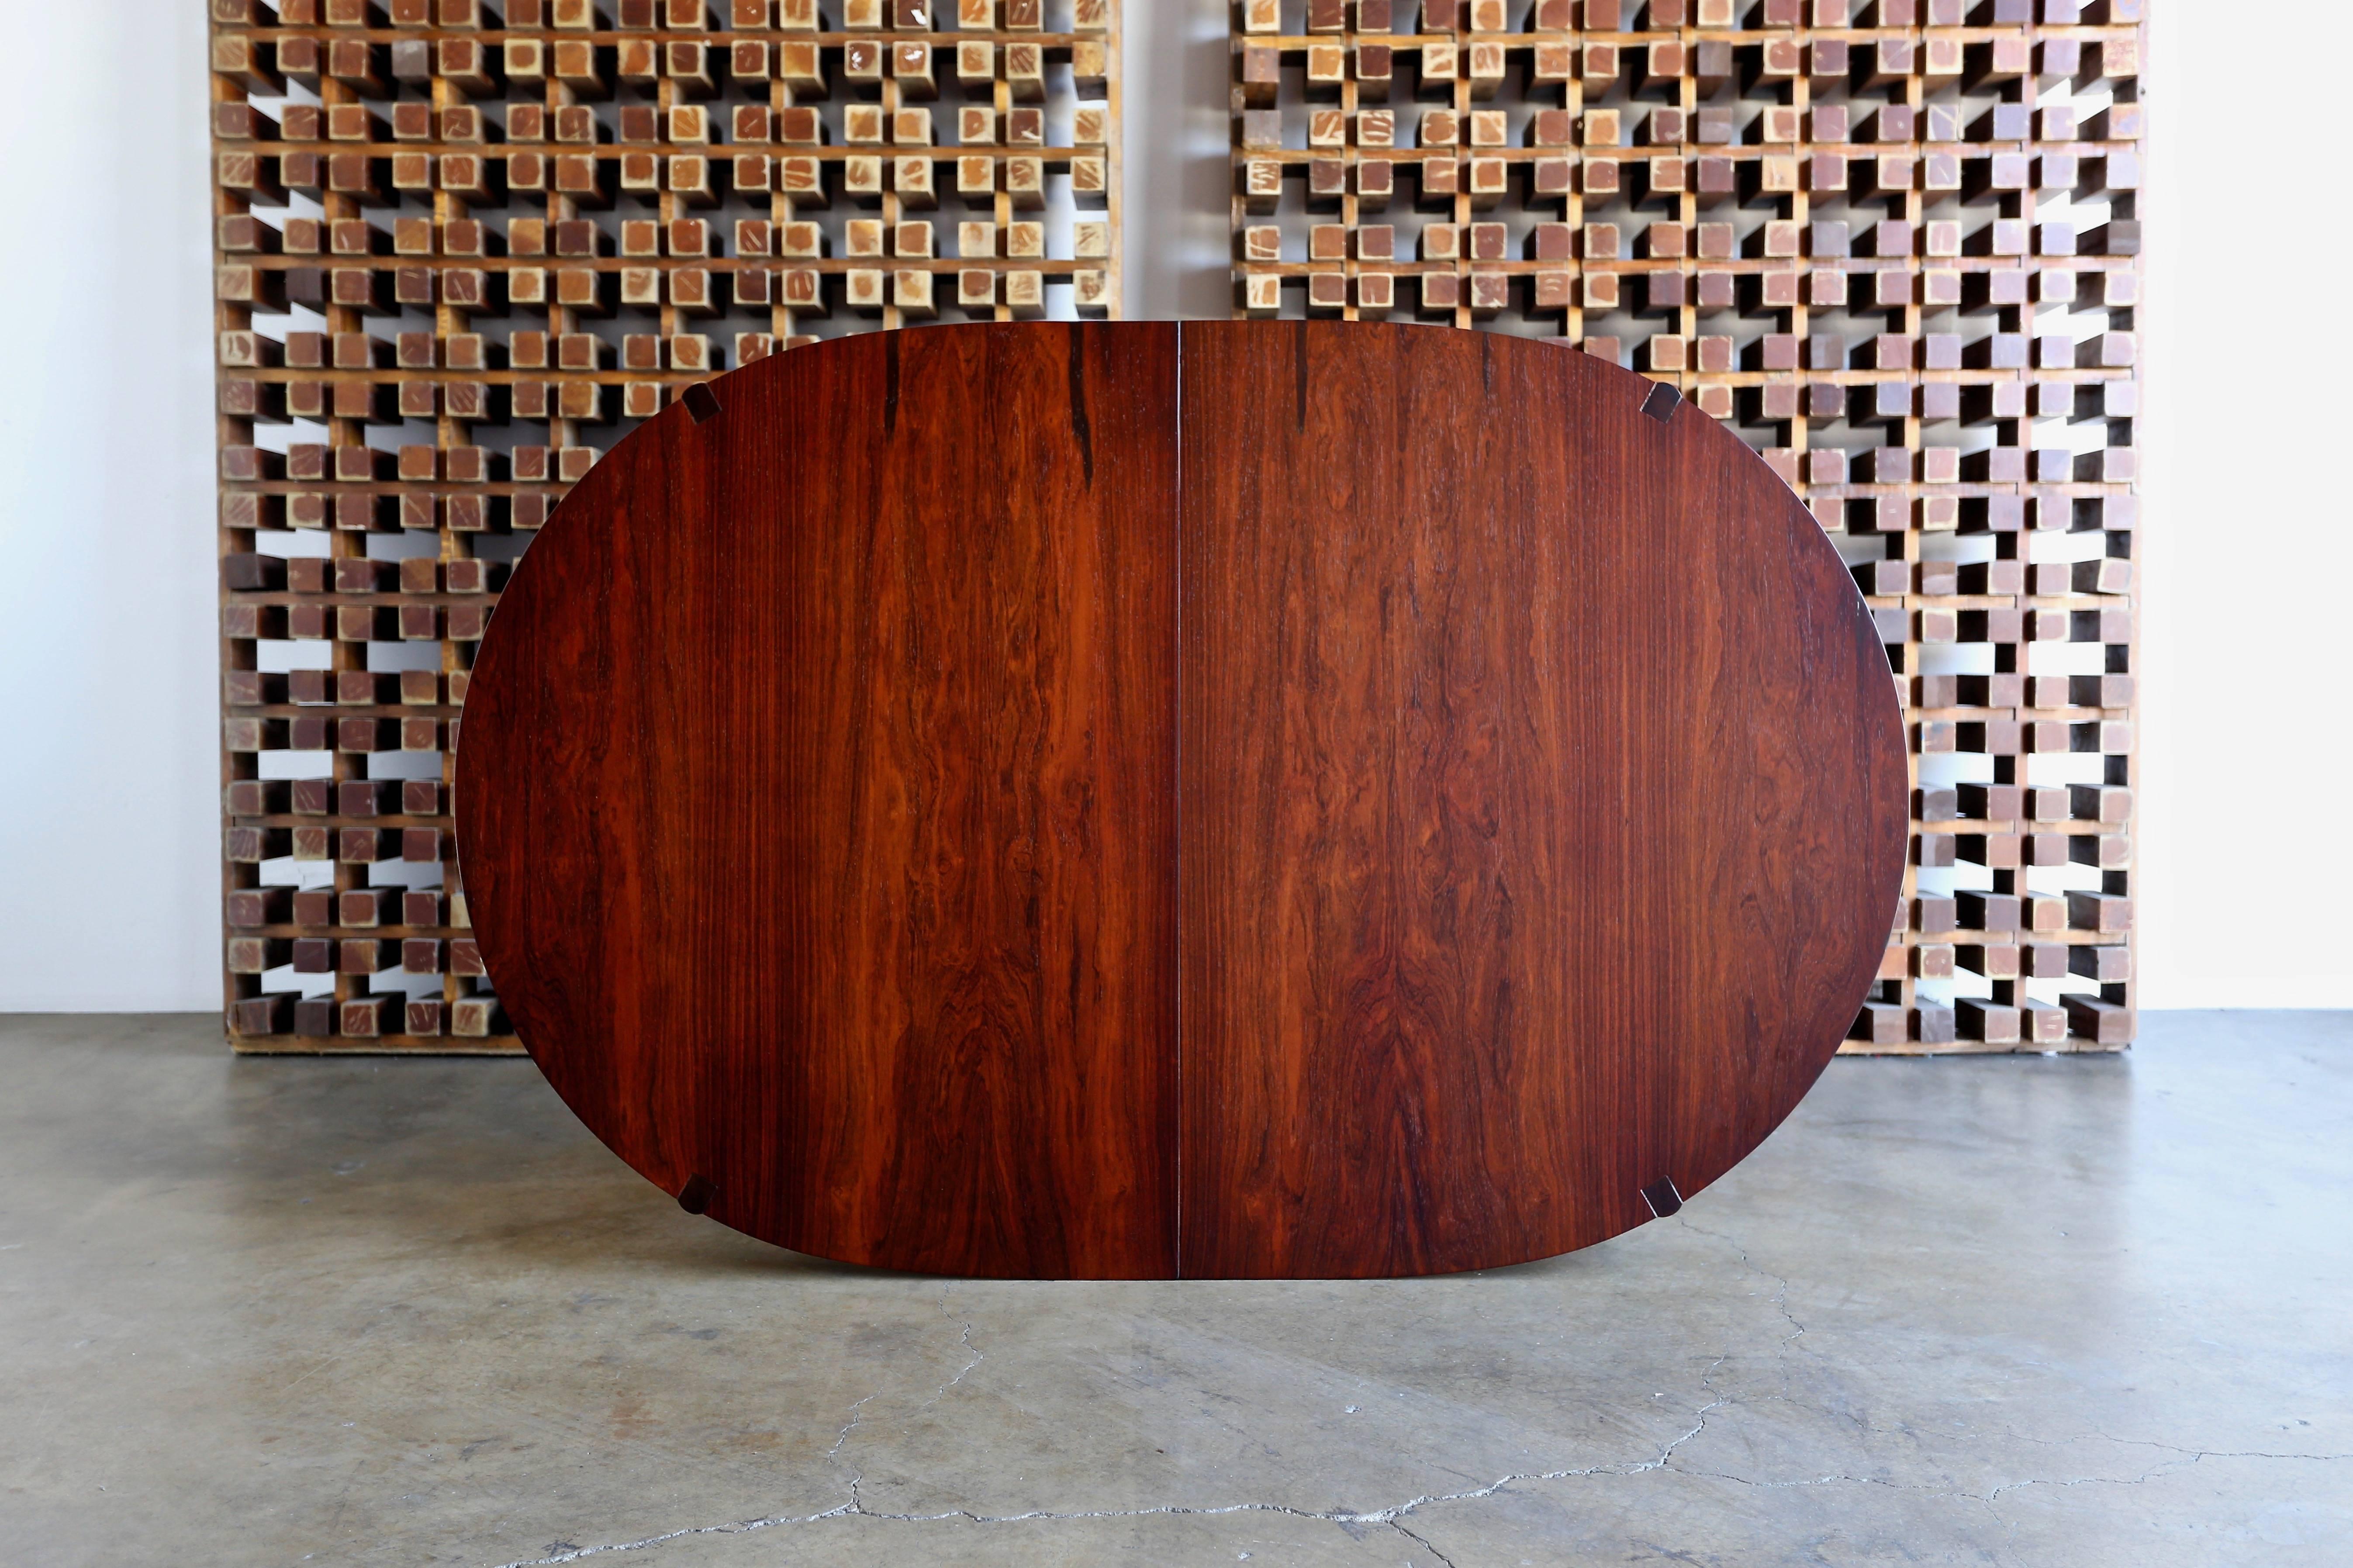 Rosewood dining table by Greta Grossman for Glenn of California. 

This table has two leaves that each measure 19.75